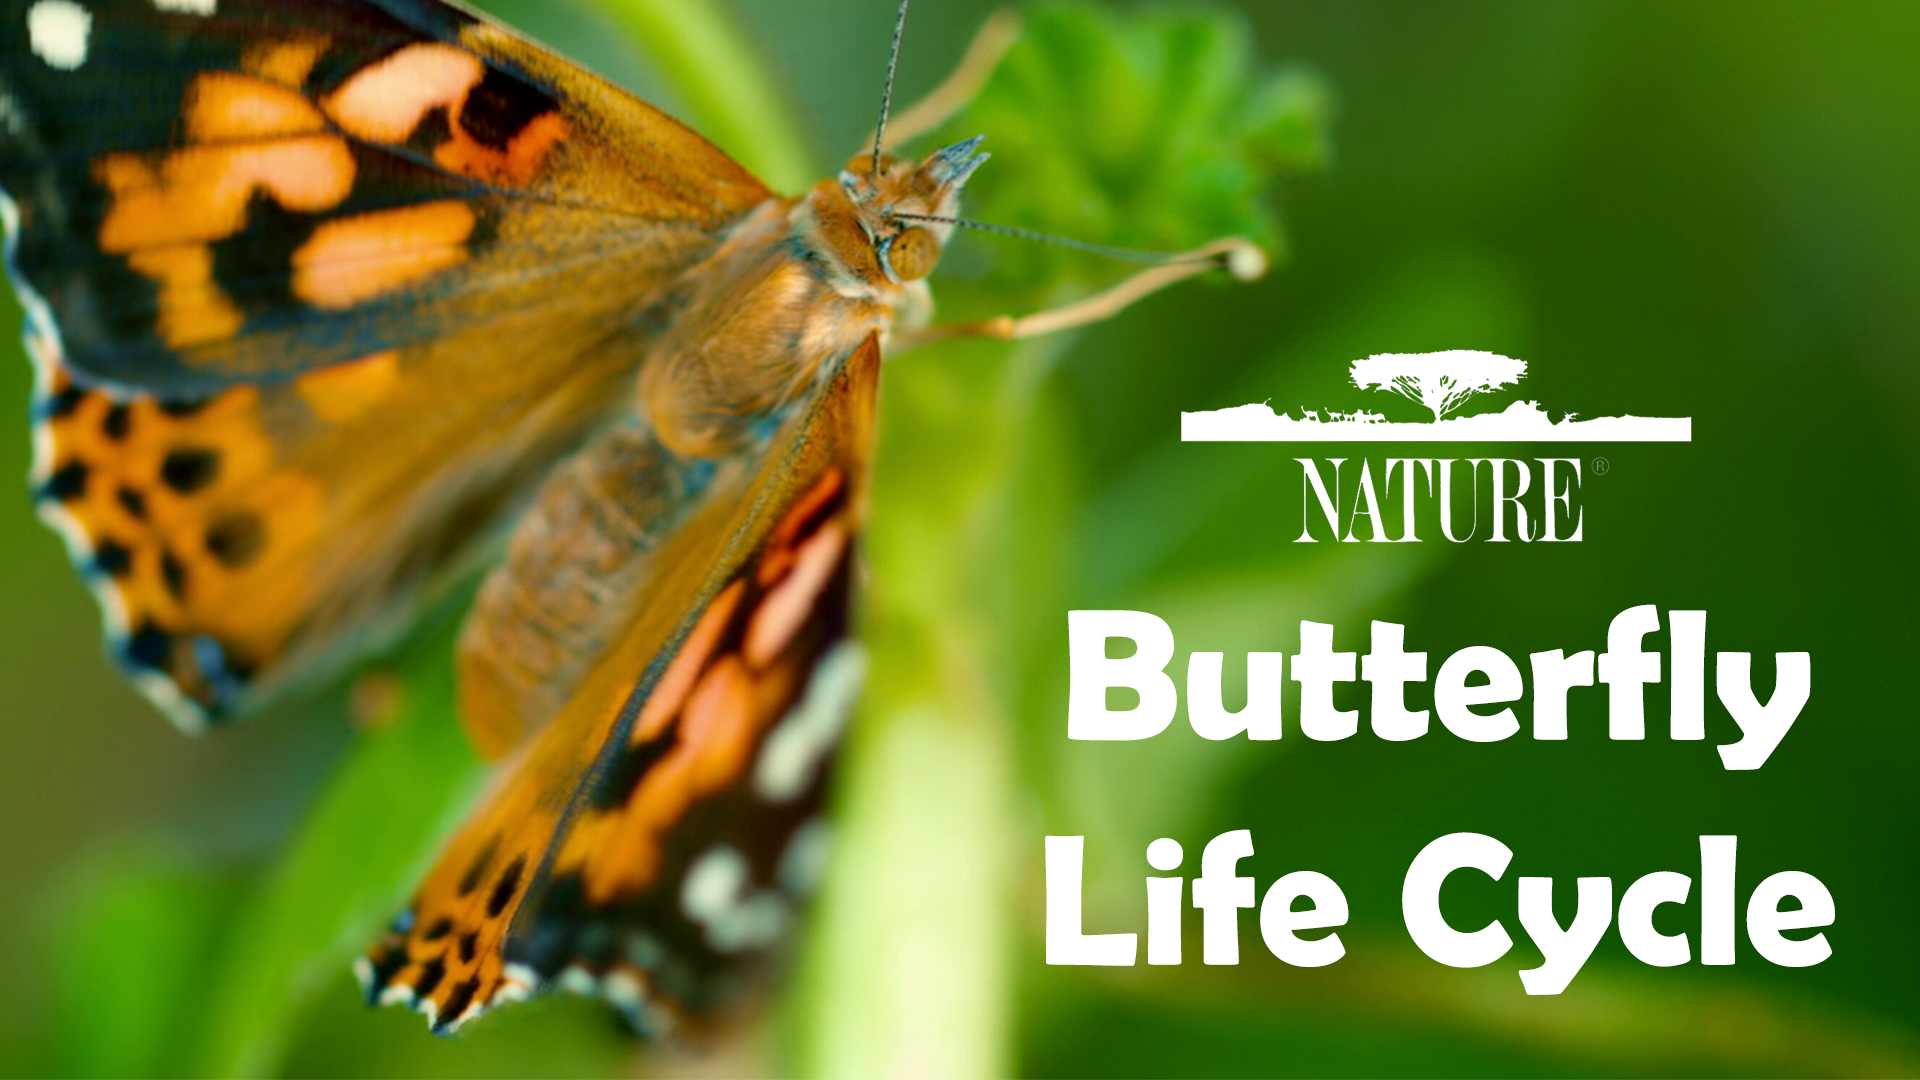 Butterfly Life Cycle | PBS LearningMedia